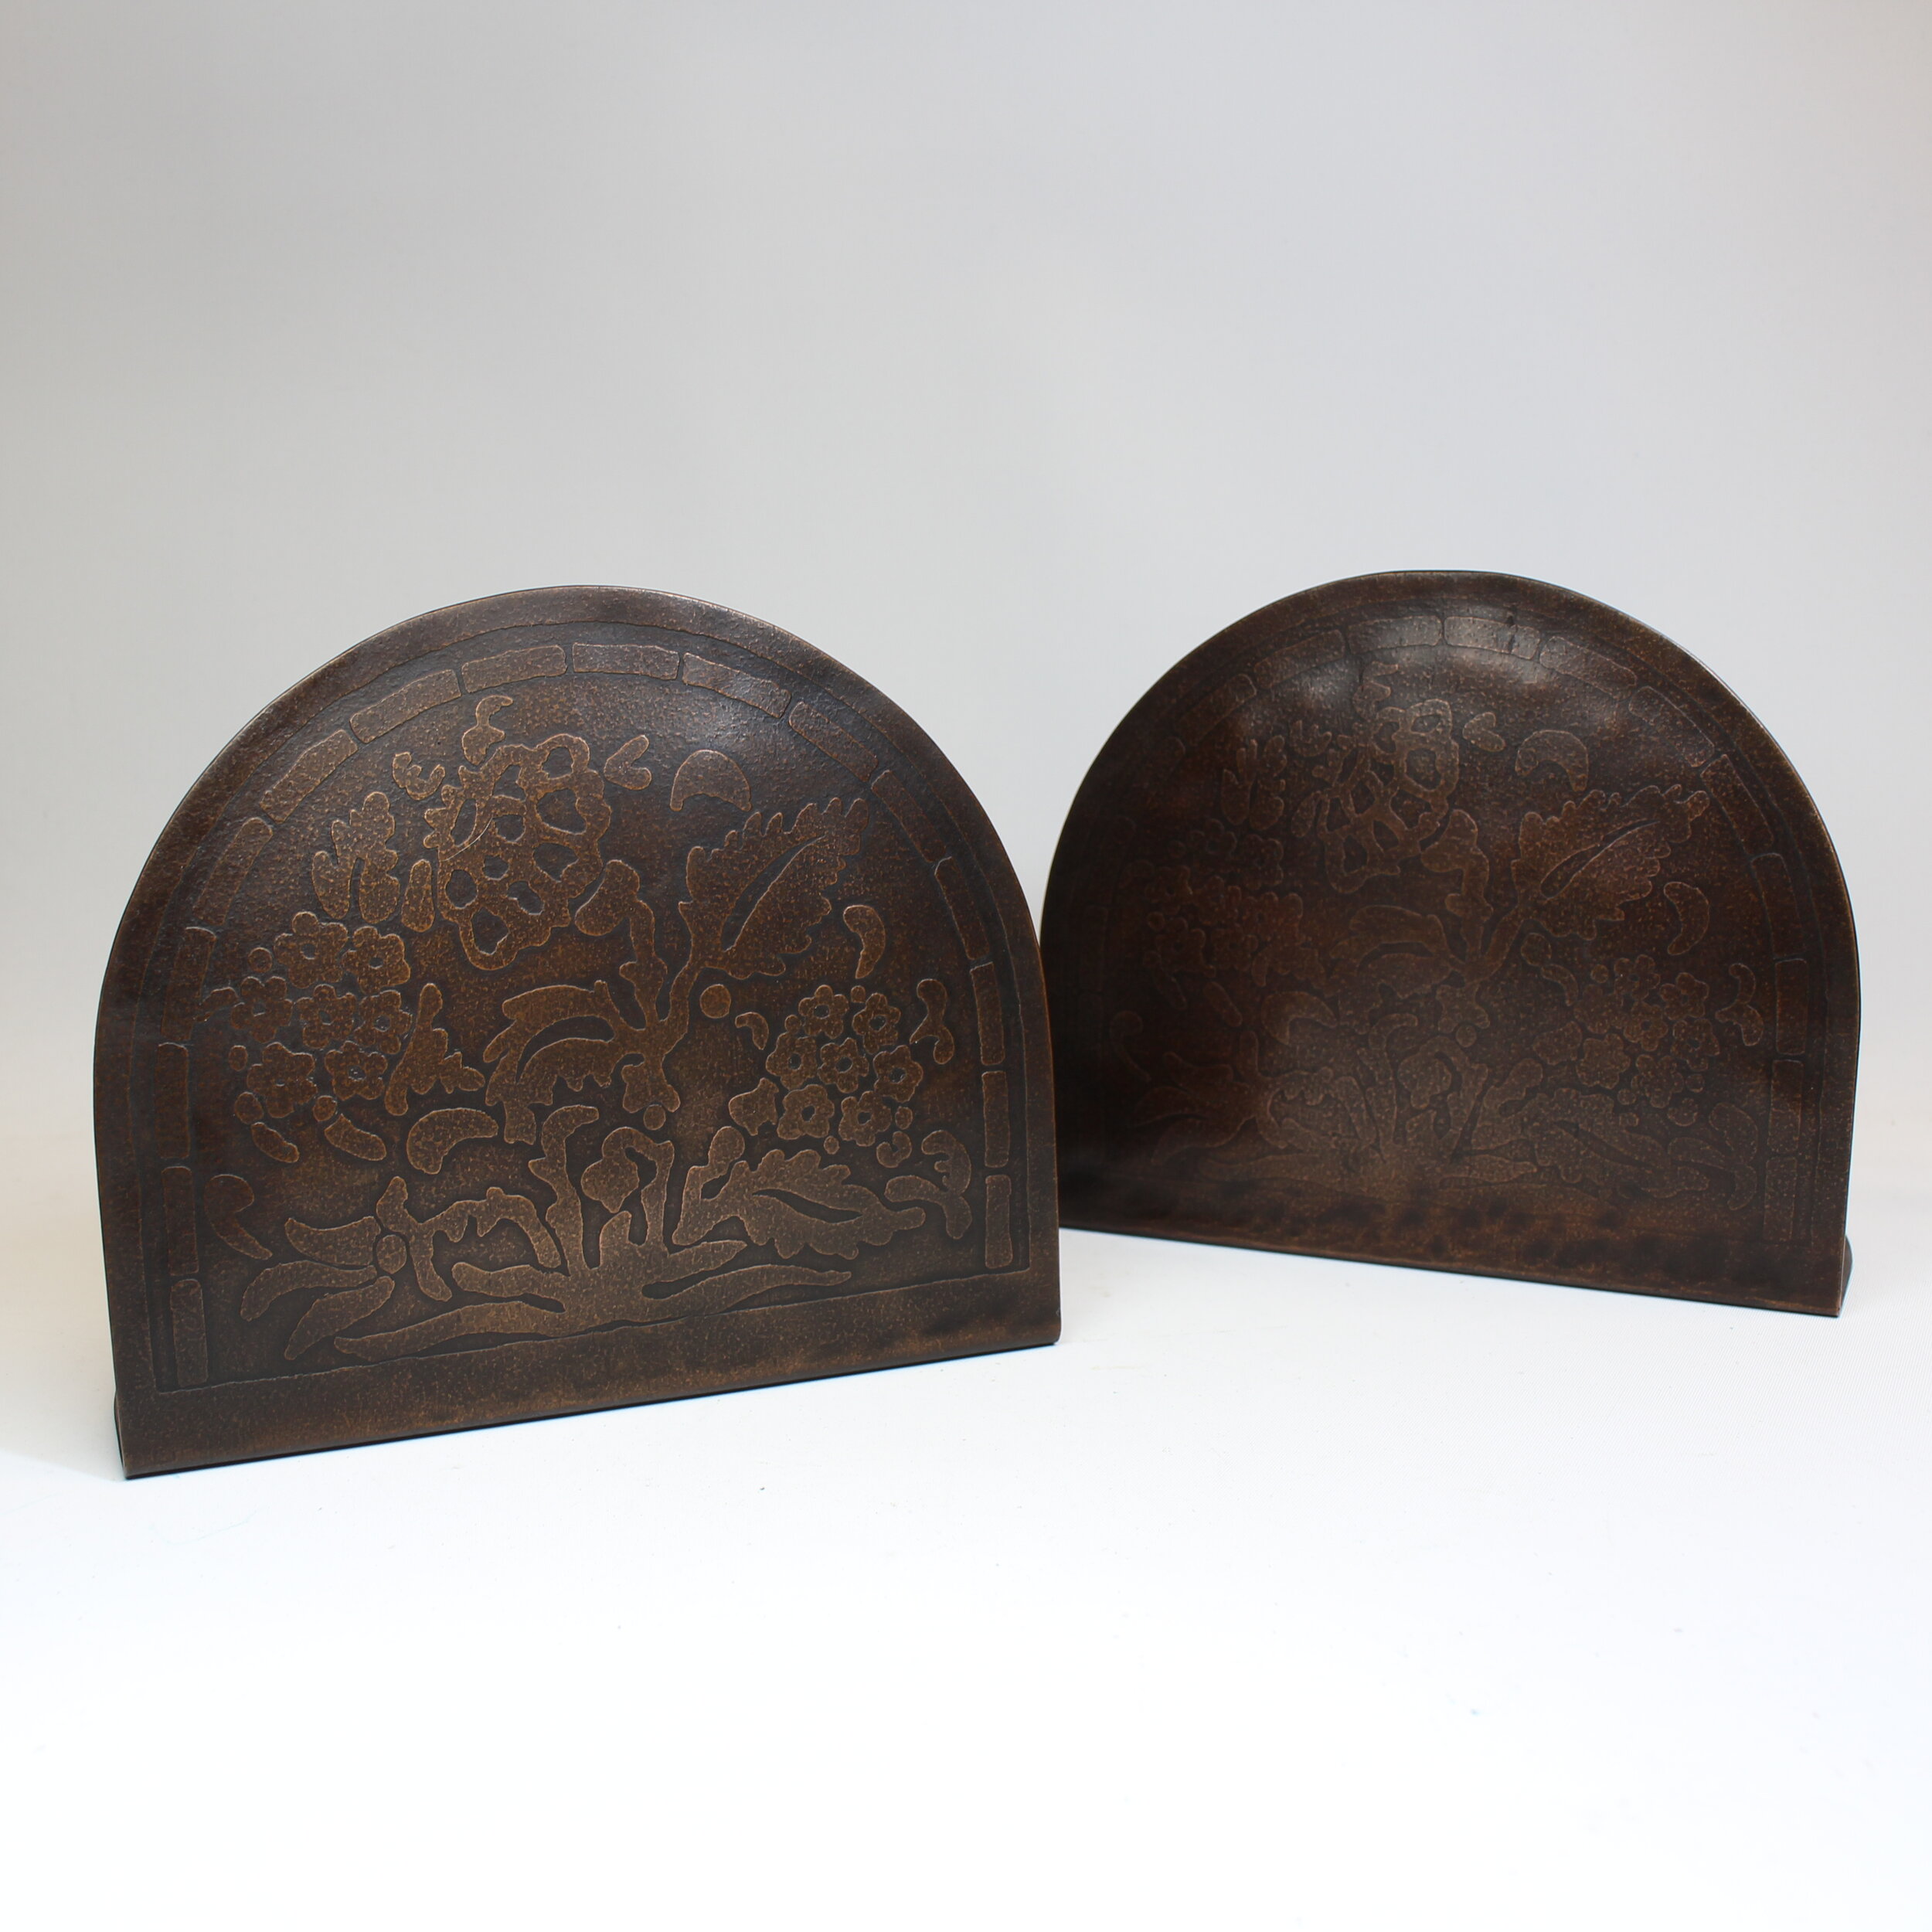 Ralph Grimm Acid Etched Bookends